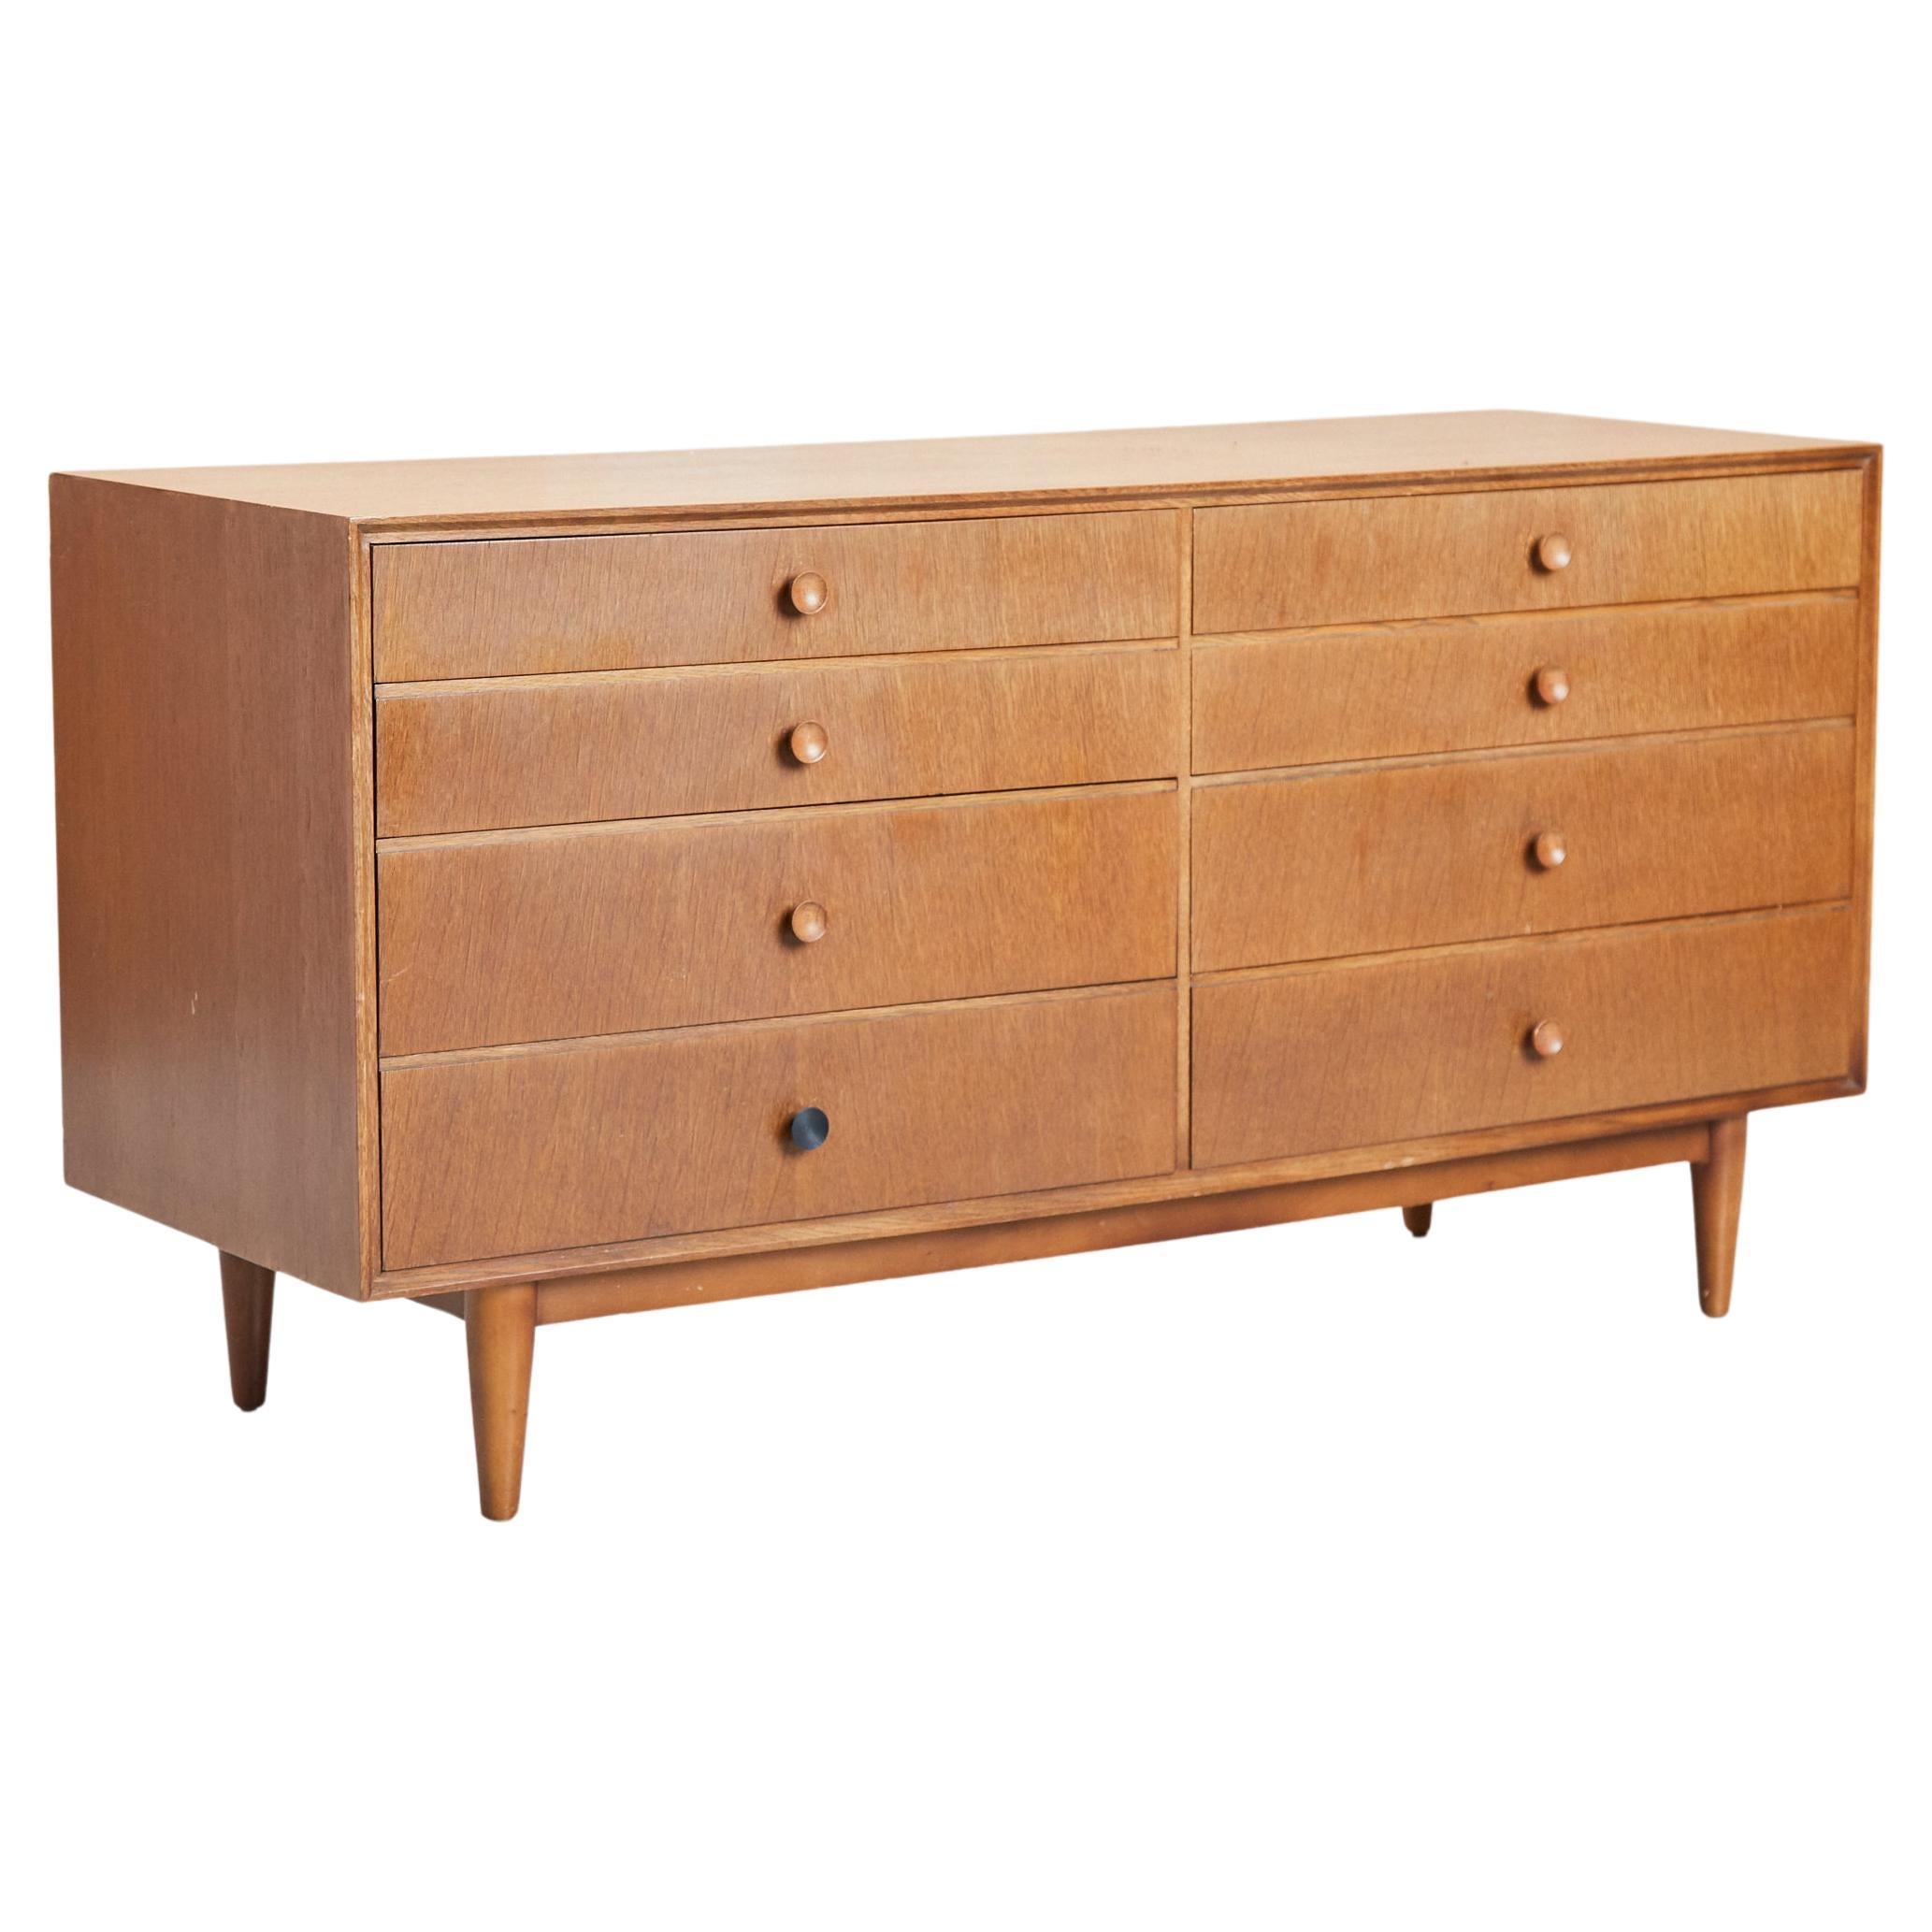 Vintage Mid Century Meredew Chest of Drawers In Oak For Sale